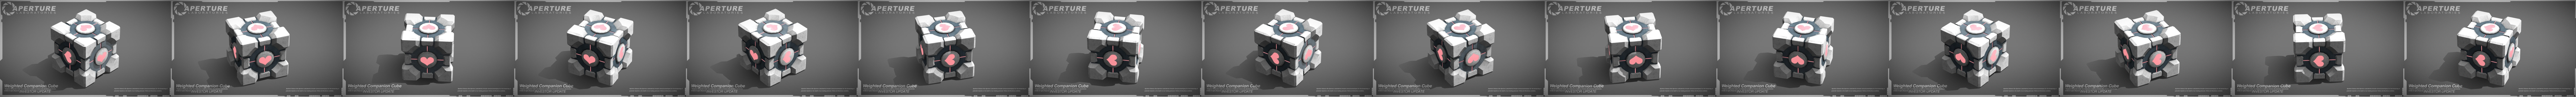 Weighted Companion Cube (Portal) - 3D model by Angel Cormier